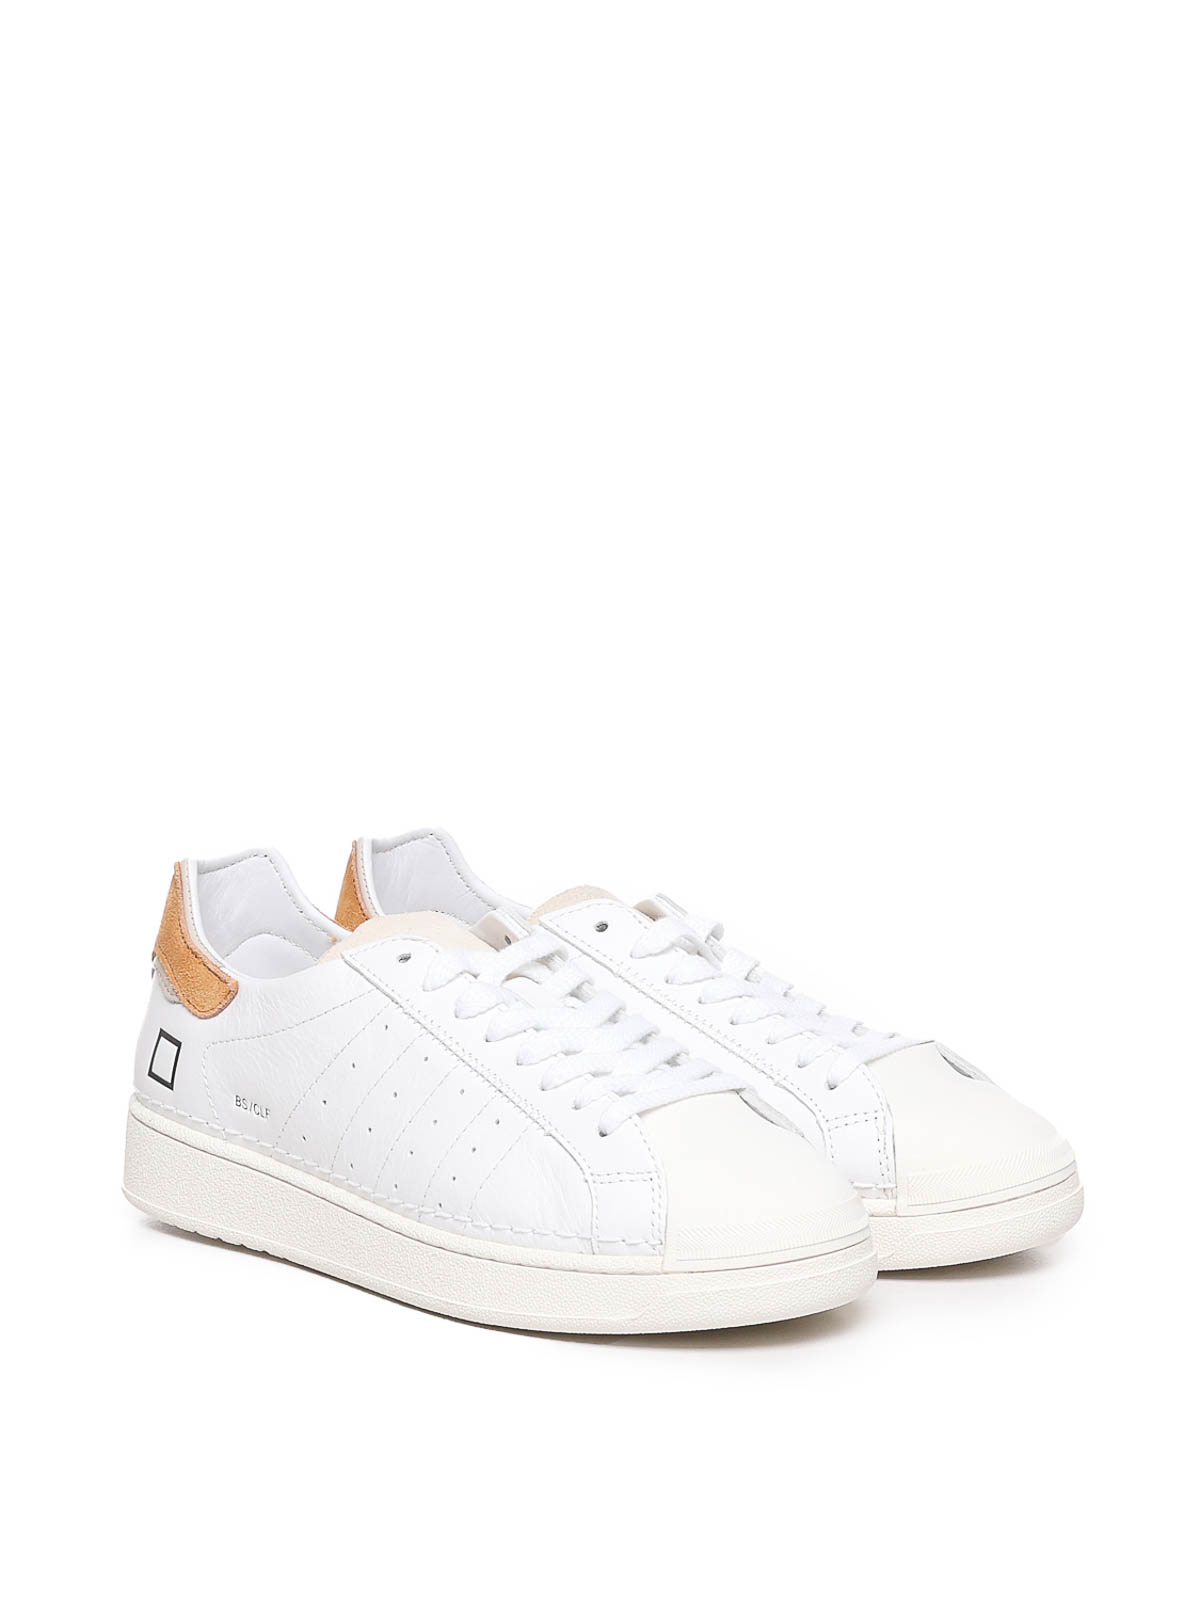 Shop Date Calfskin Sneakers In Taupe